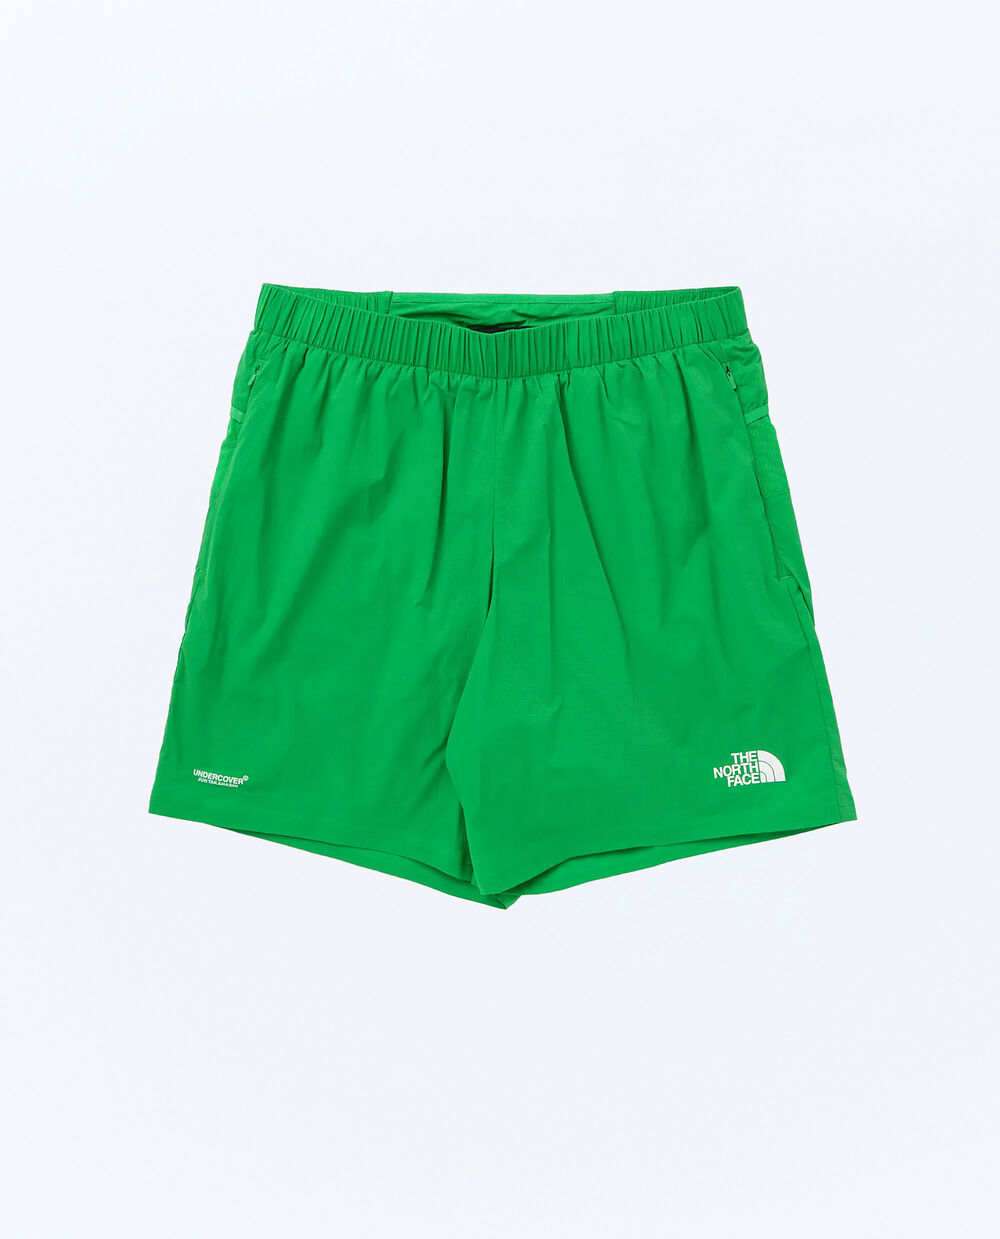 THE NORTH FACE SOUKUU TRAIL RUN UTILITY 2-IN-1 SHORTS